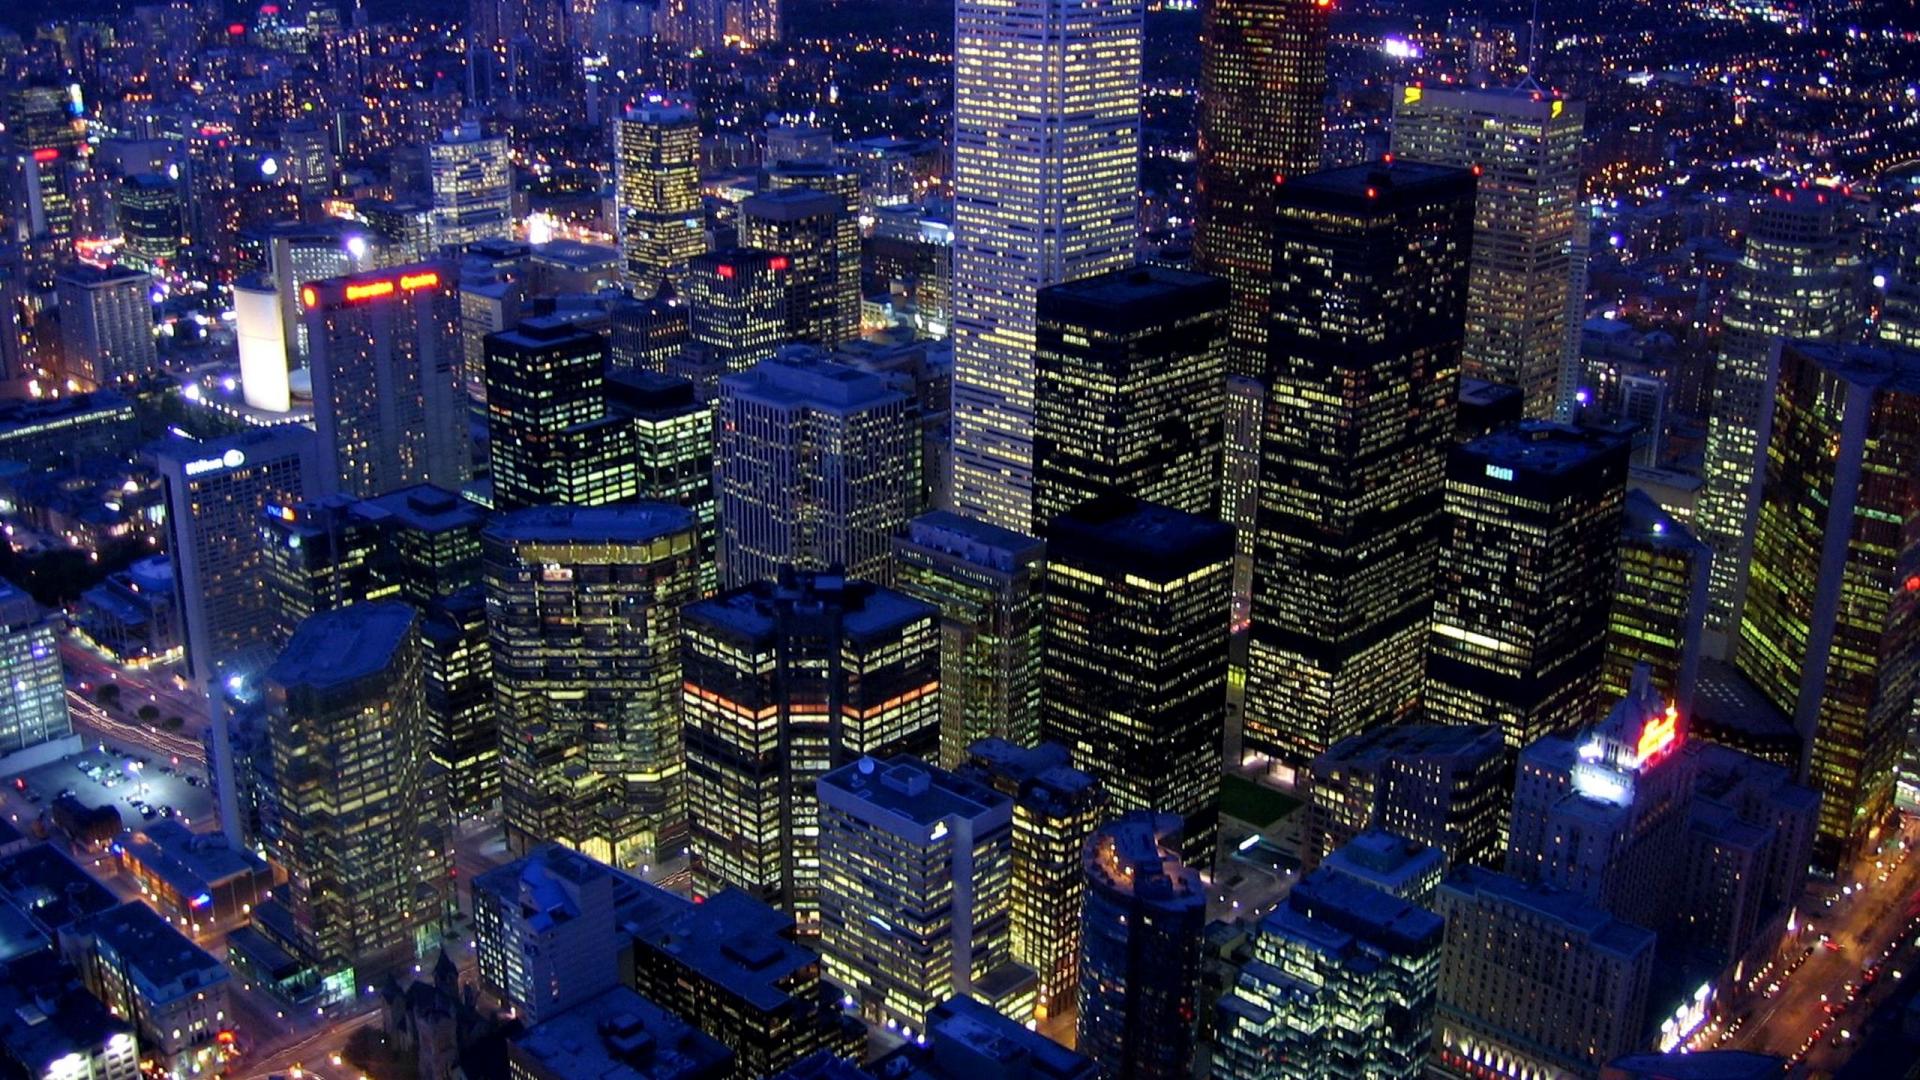 view from cn tower in toronto at nightjpg